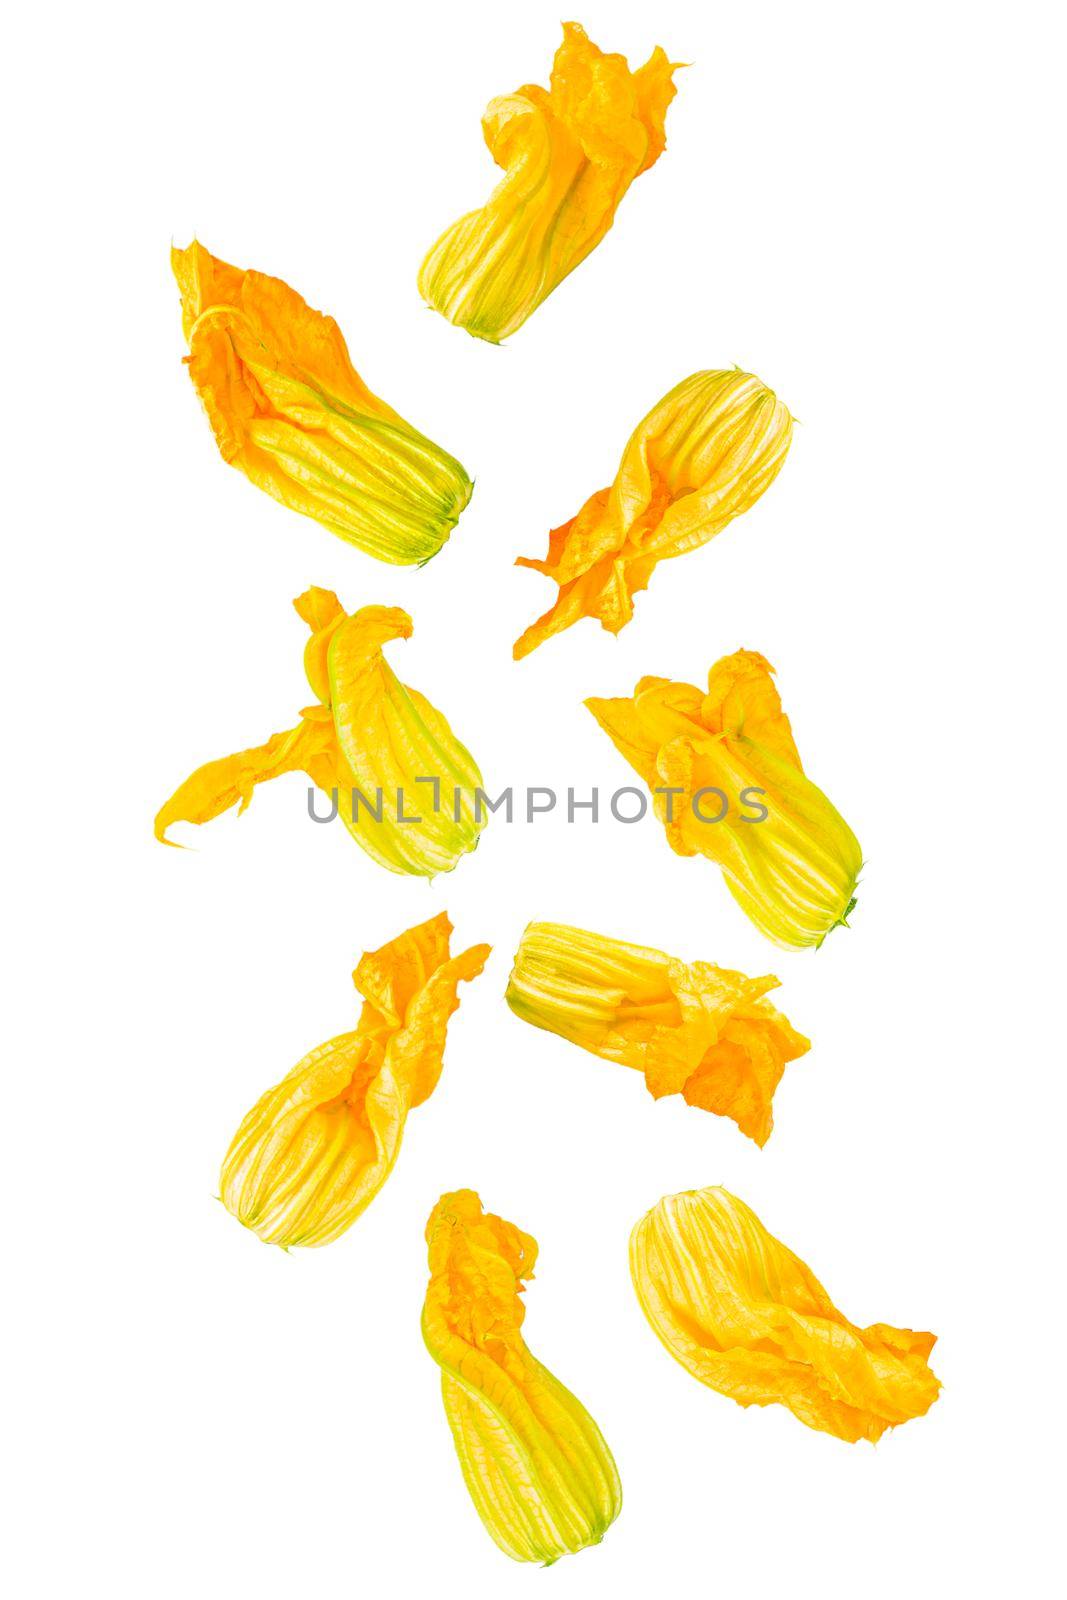 Courgette flowers in the air isolated on white background by Ciorba